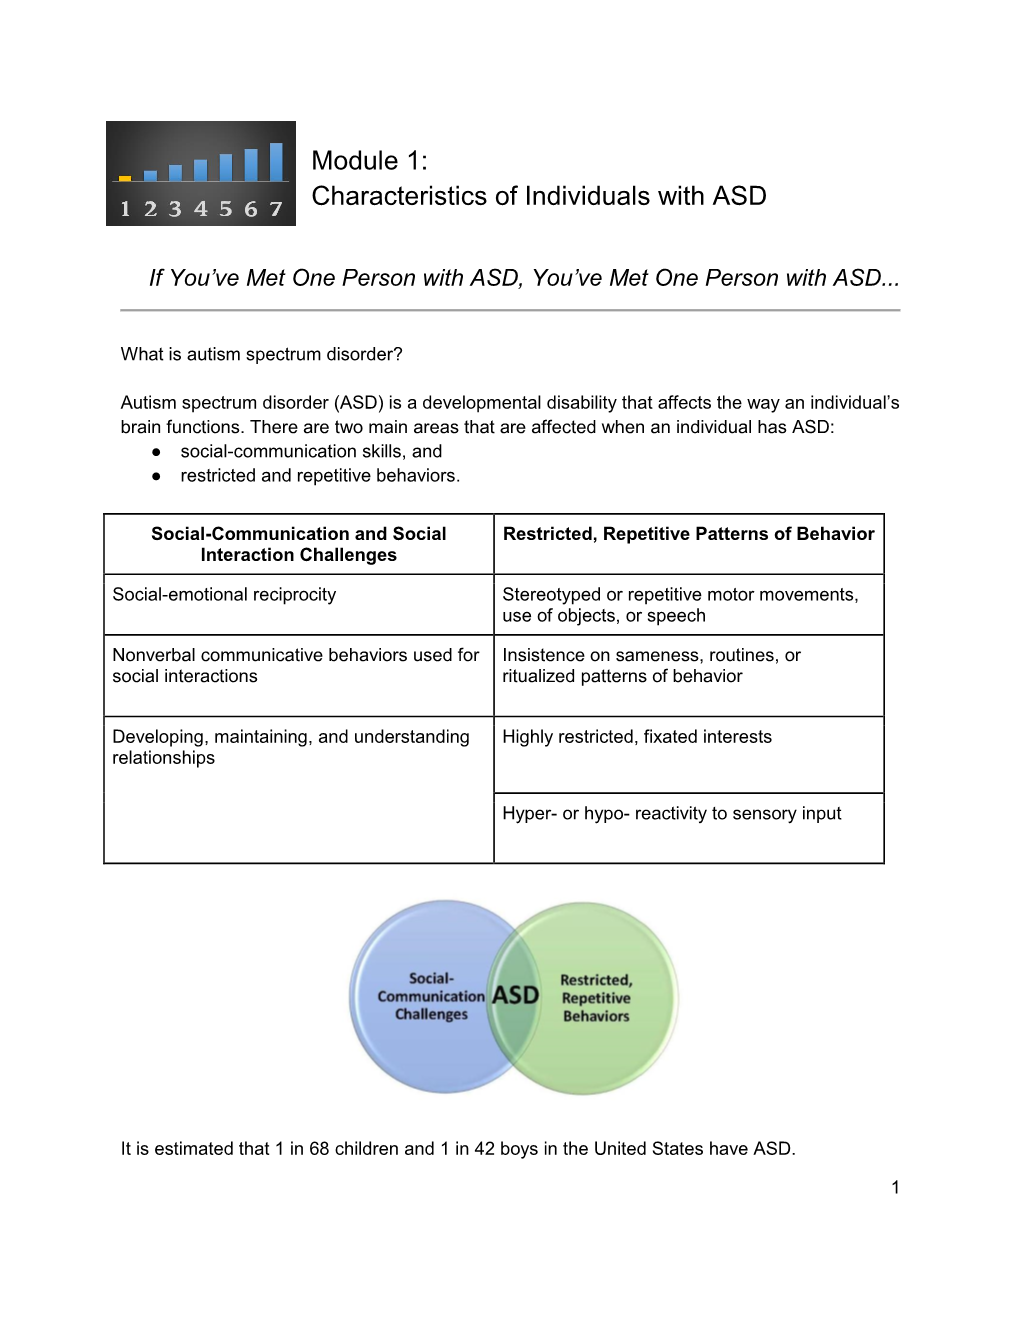 Module 1: Characteristics of Individuals with ASD